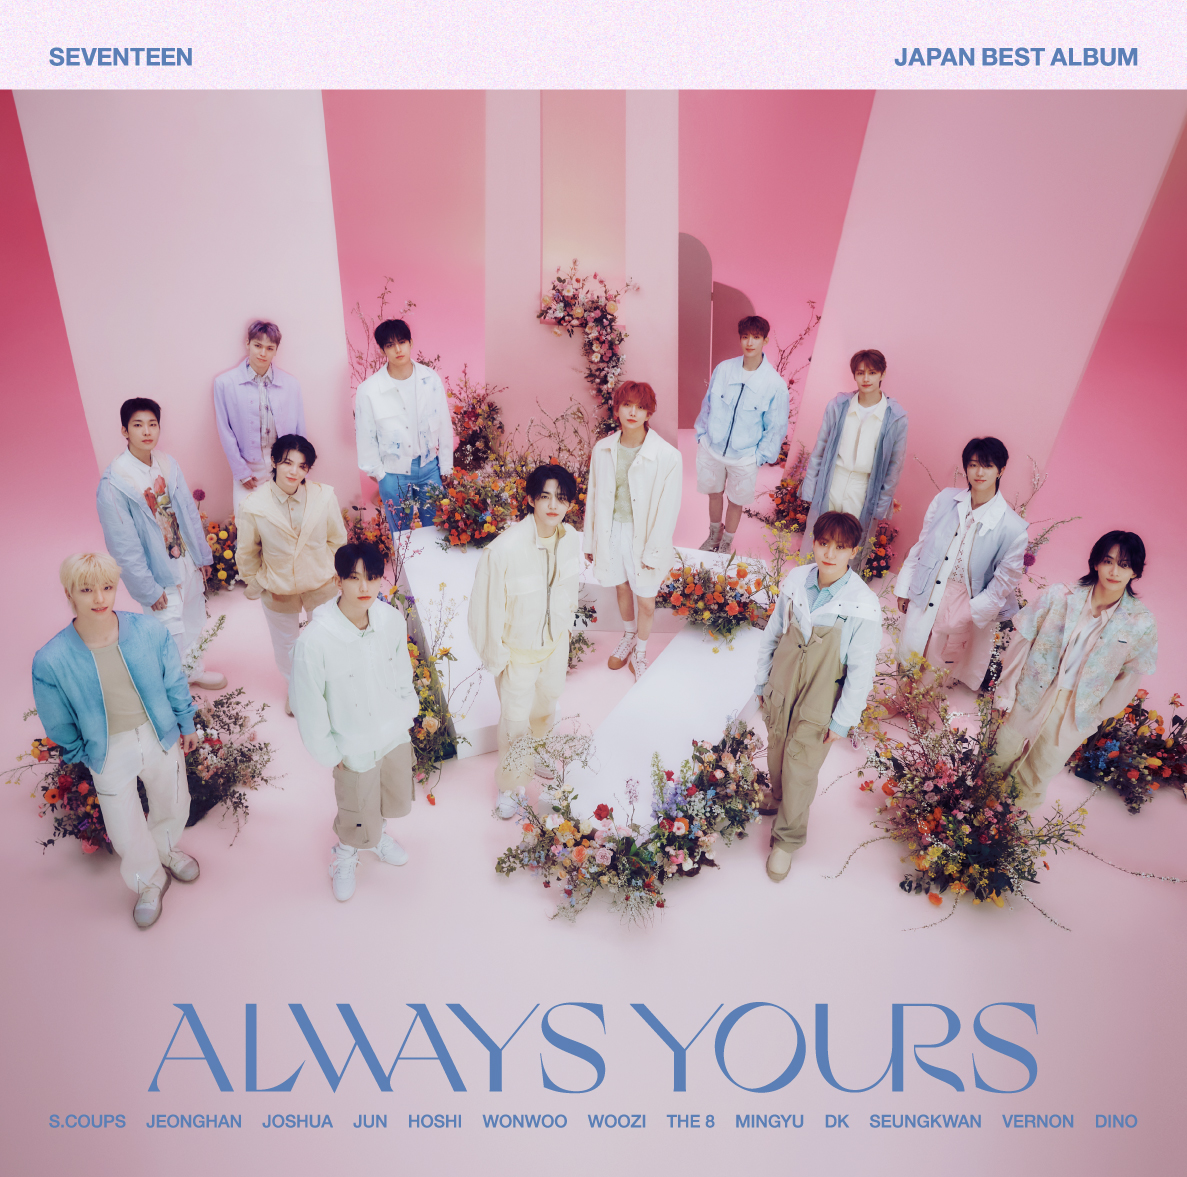 SEVENTEEN always yours ツタヤ ラキドロ ミンハオ